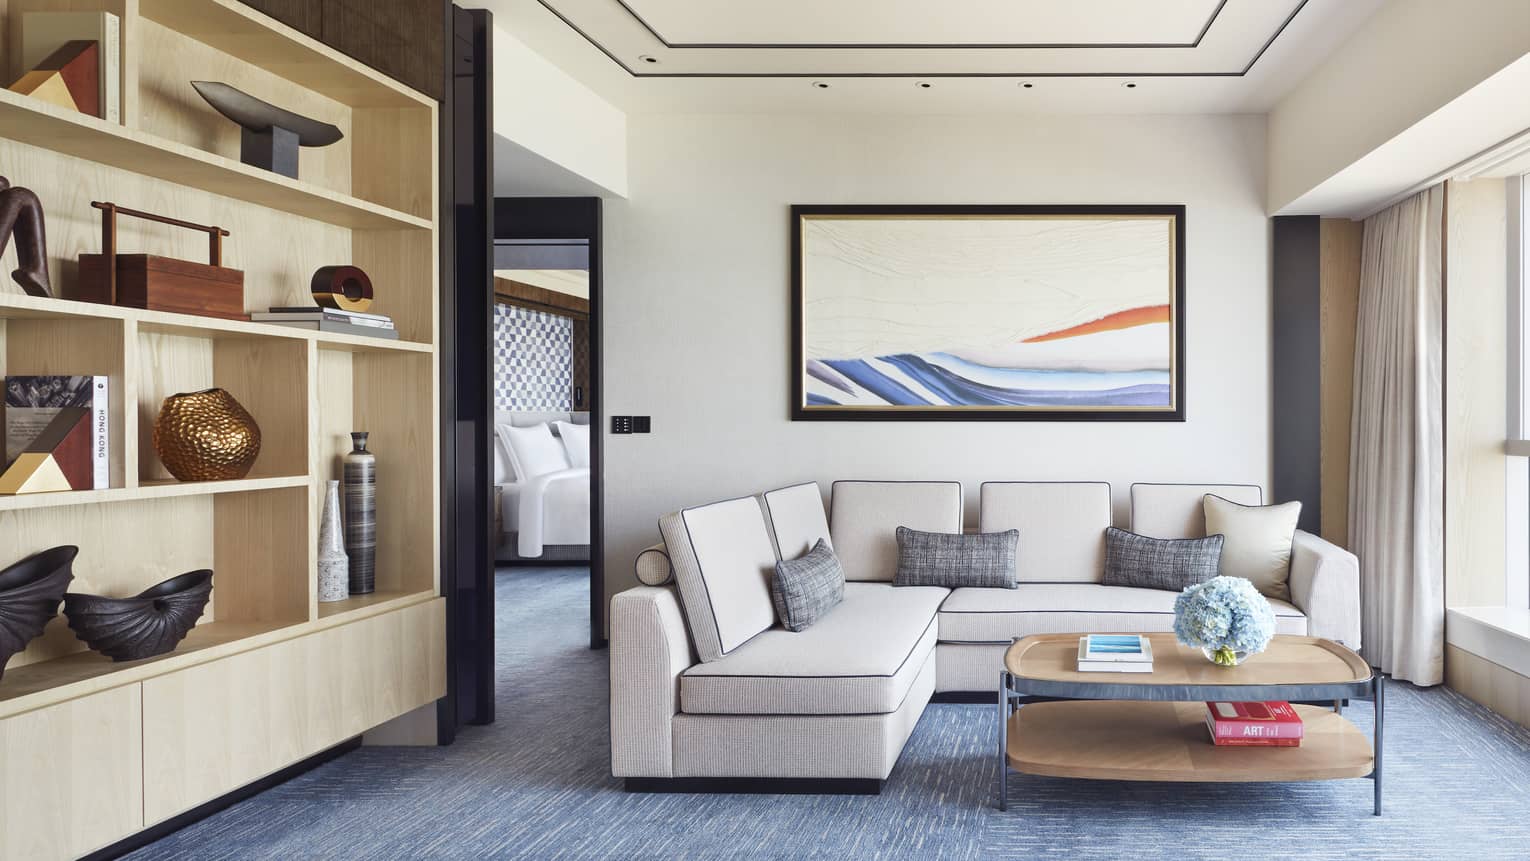 Living room with off-white, l-shaped sofa, blue carpet, wooden coffee table, large horizontal artwork, wall of shelves